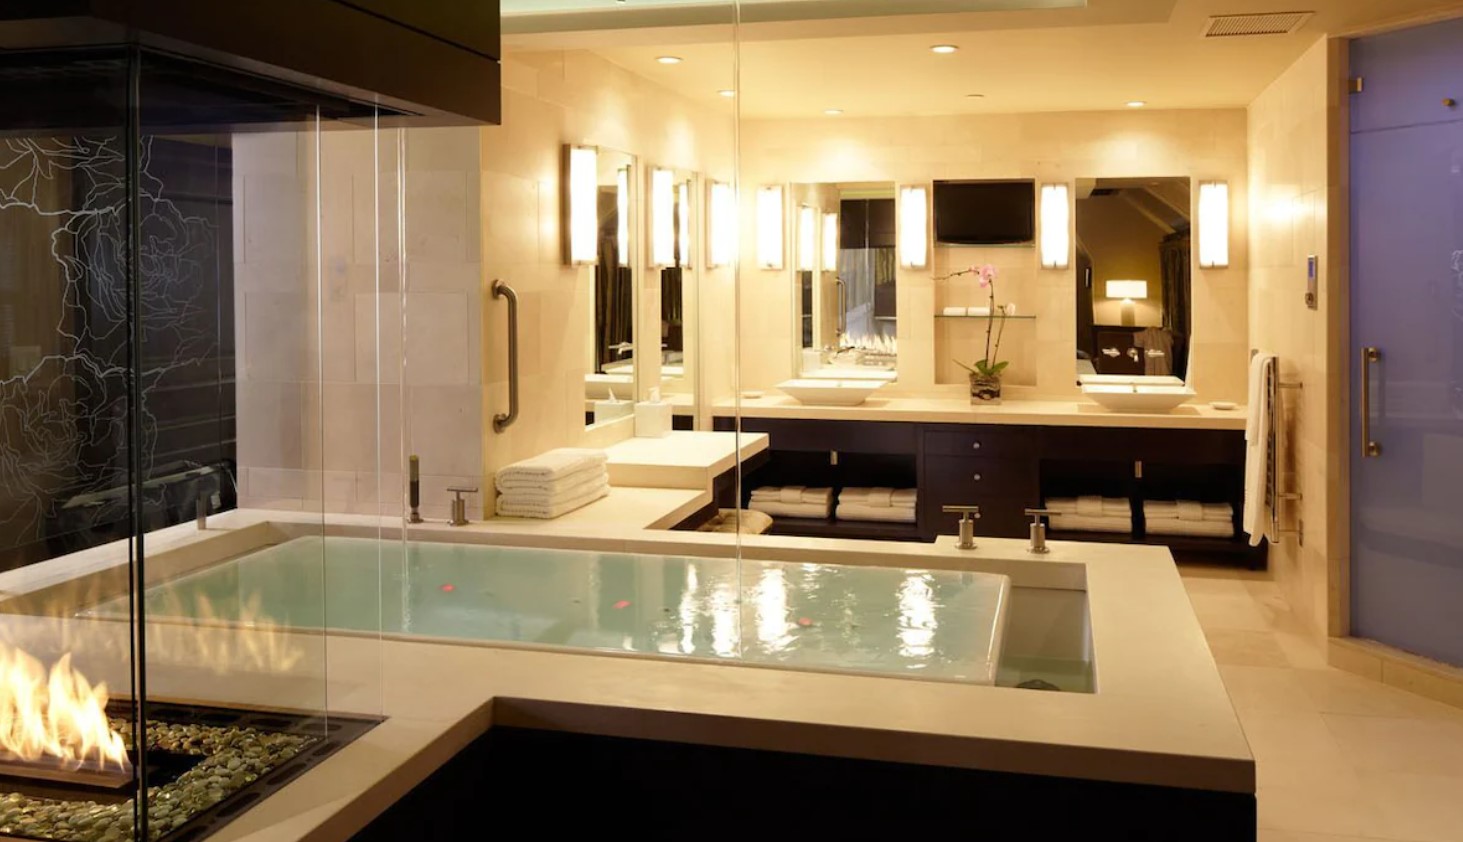 A large luxurious bathroom with a glass walled fireplace, a large soaking tub, a standing shower, and a double vanity. 